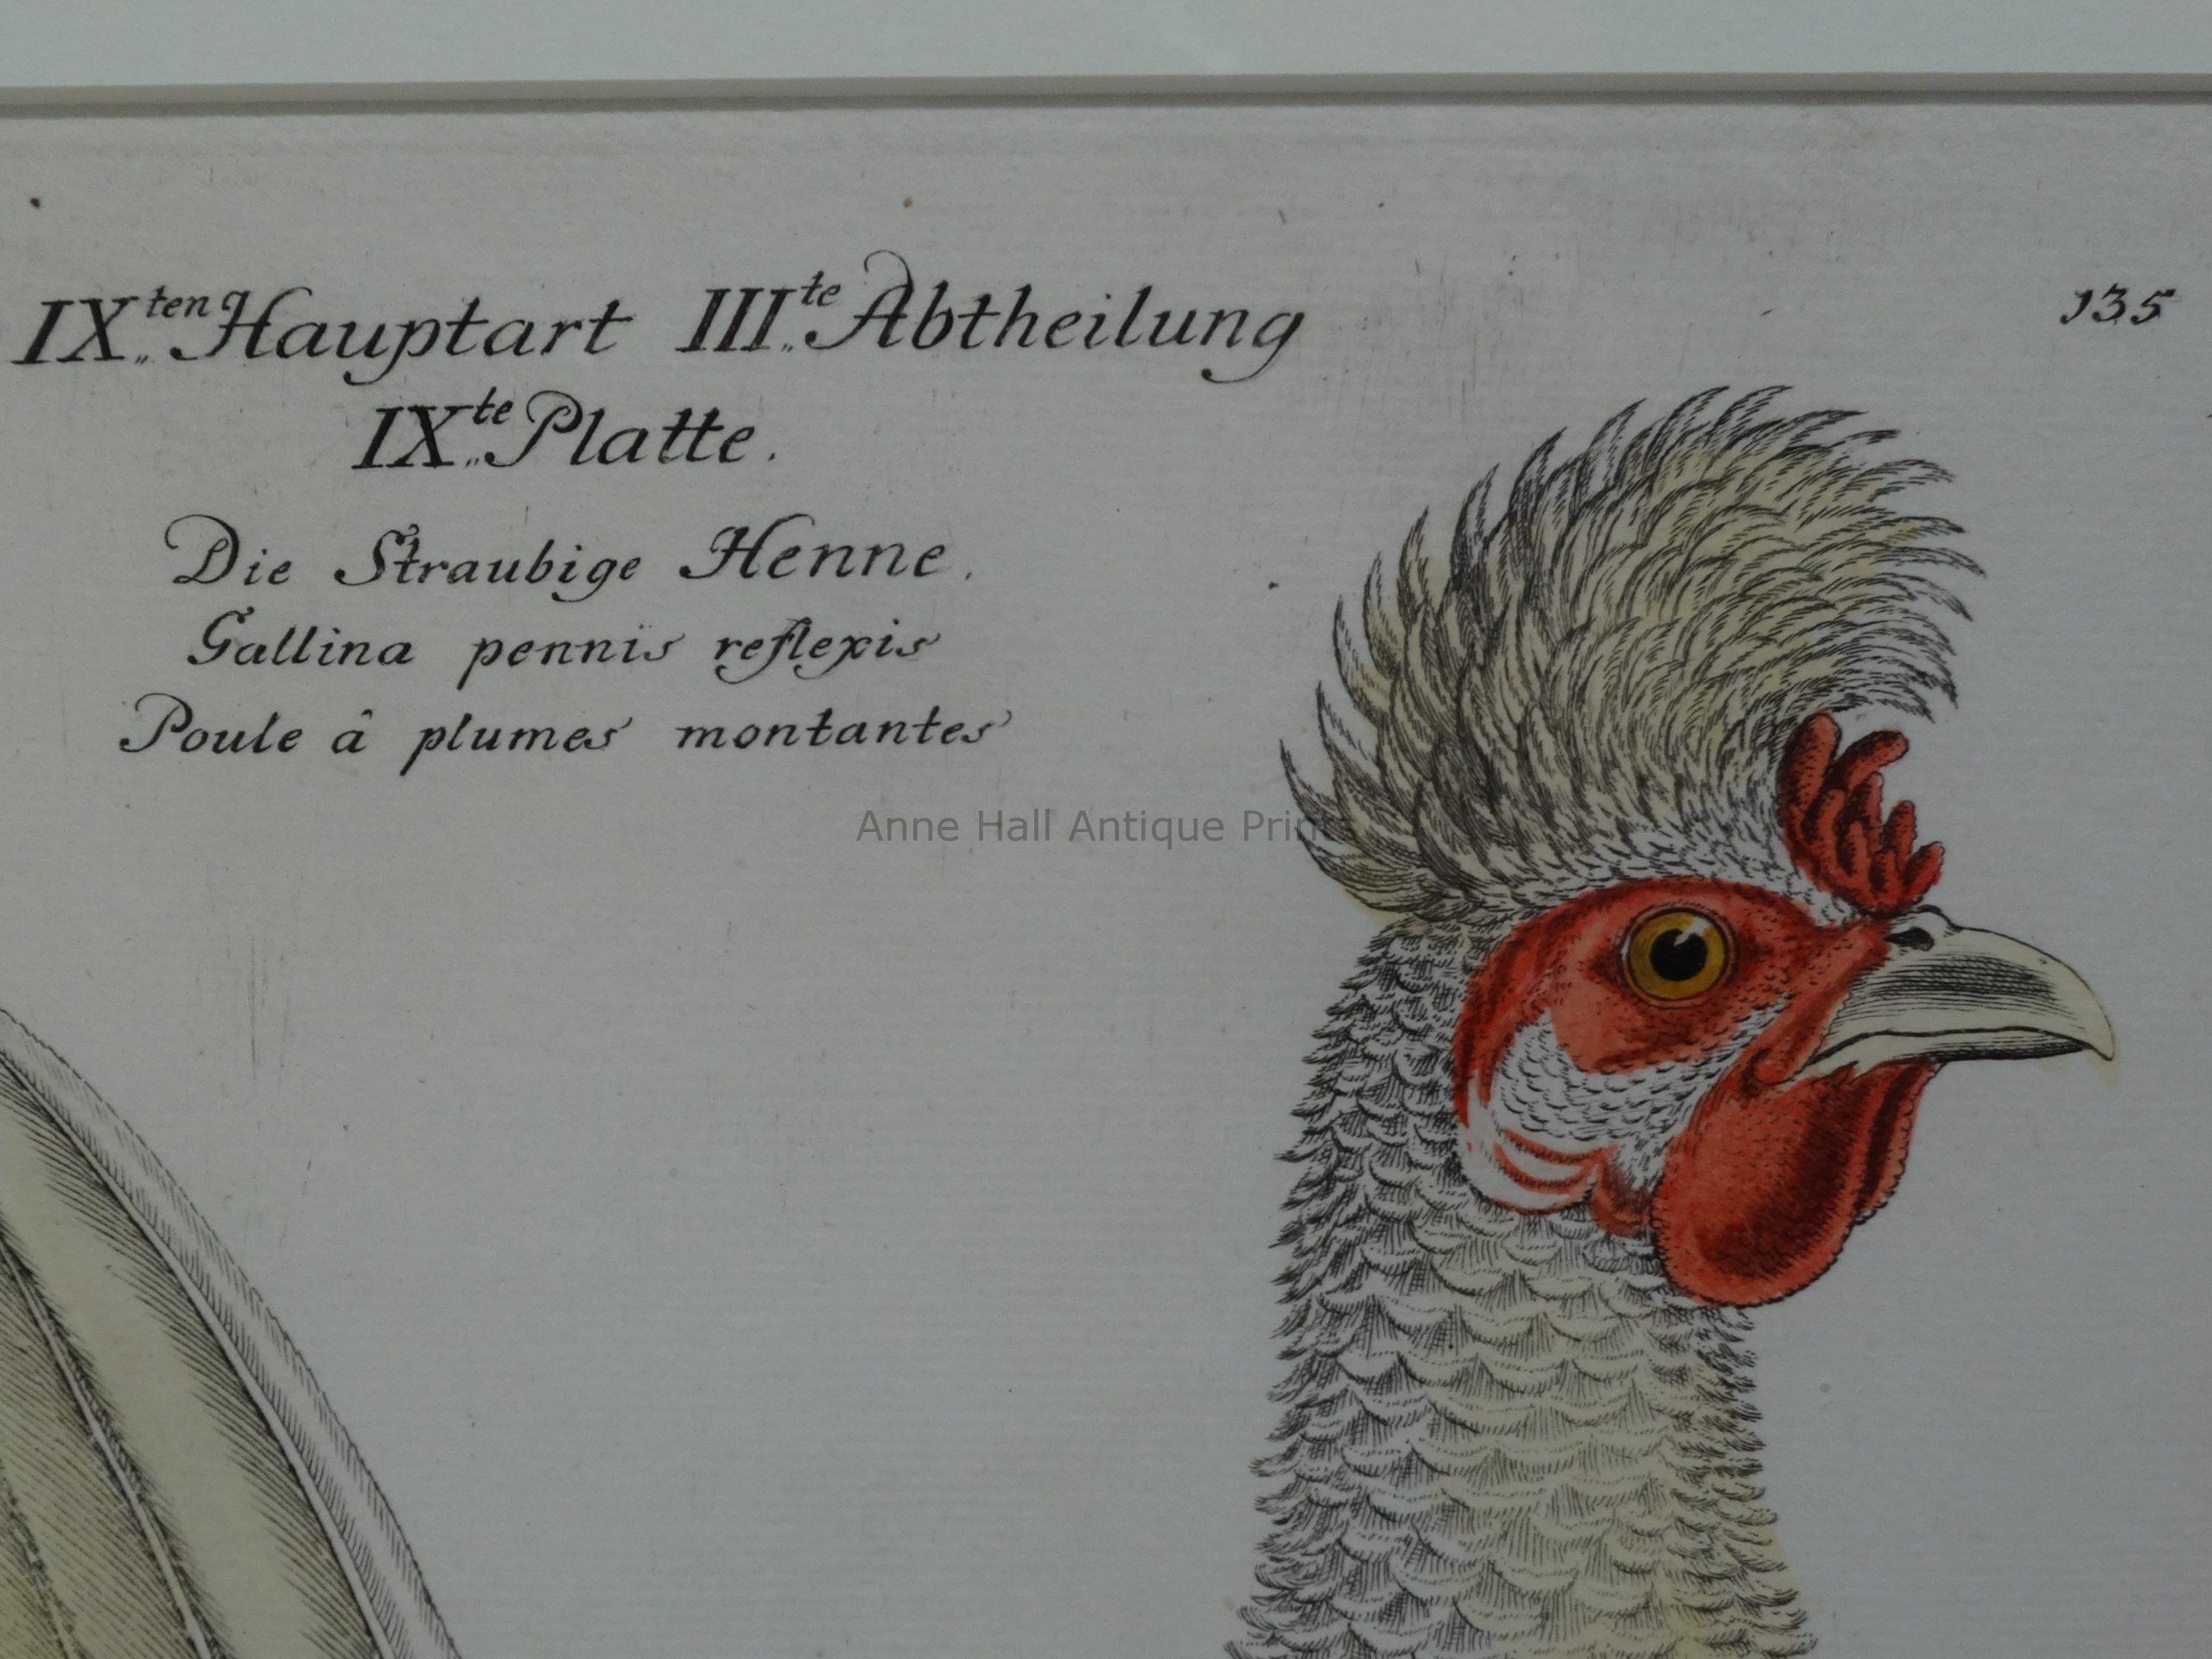 We sell antique poultry engravings and lithographs over 100 years old. Our antique chicken prints are colorful and priced fairly. This is closeup of a beautiful white rooster with red on the face.